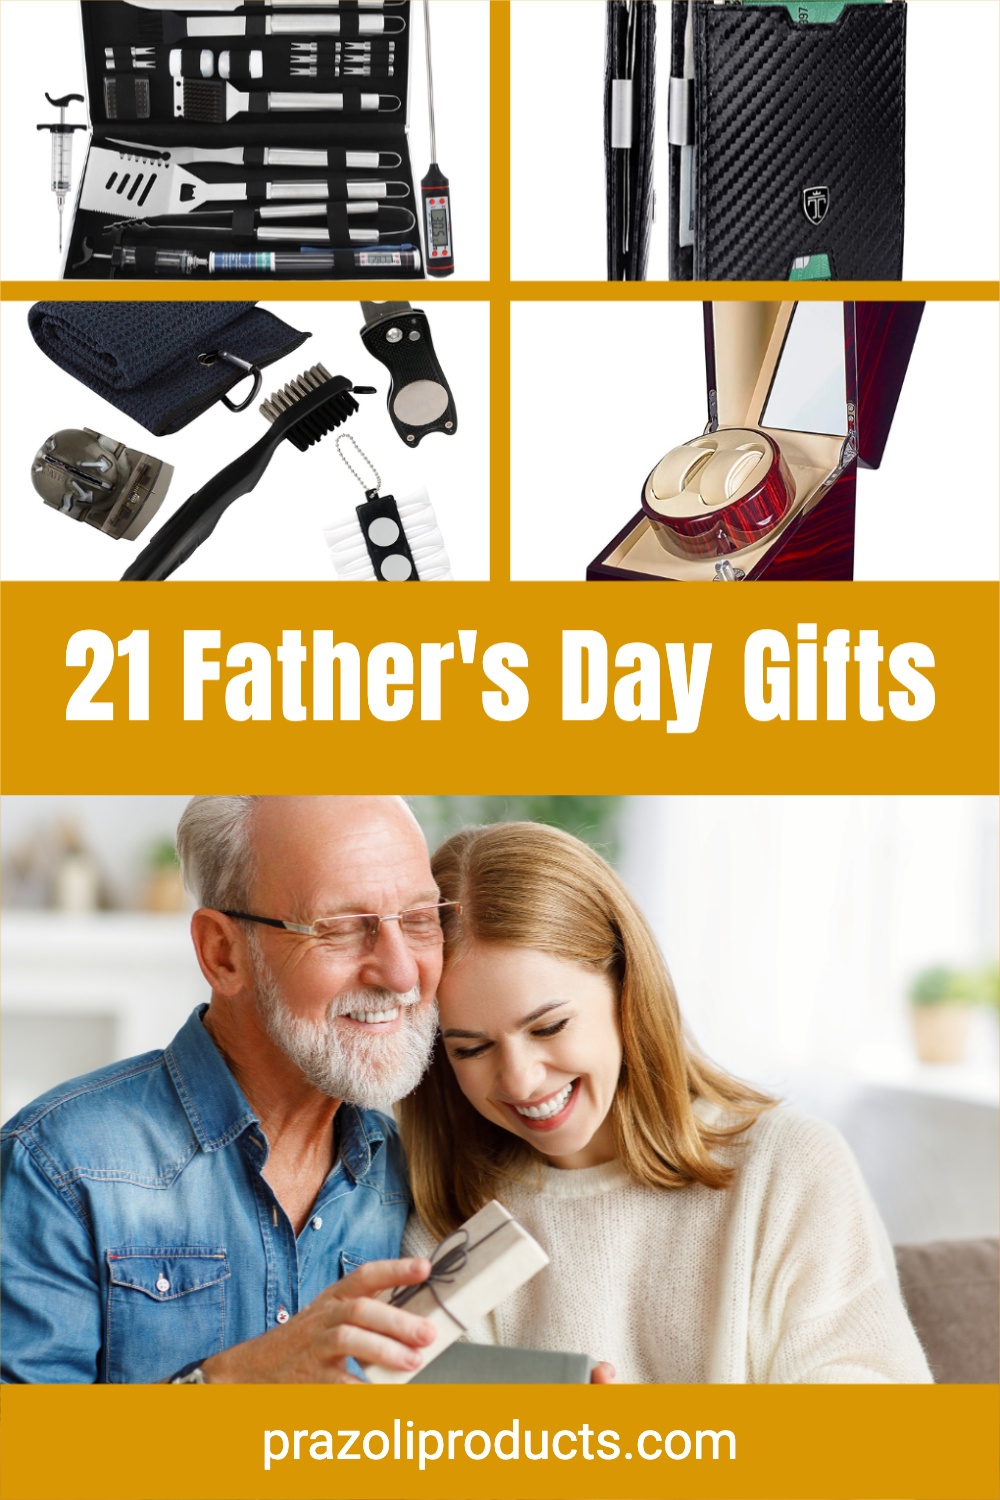 21-Father's-Day-Gifts